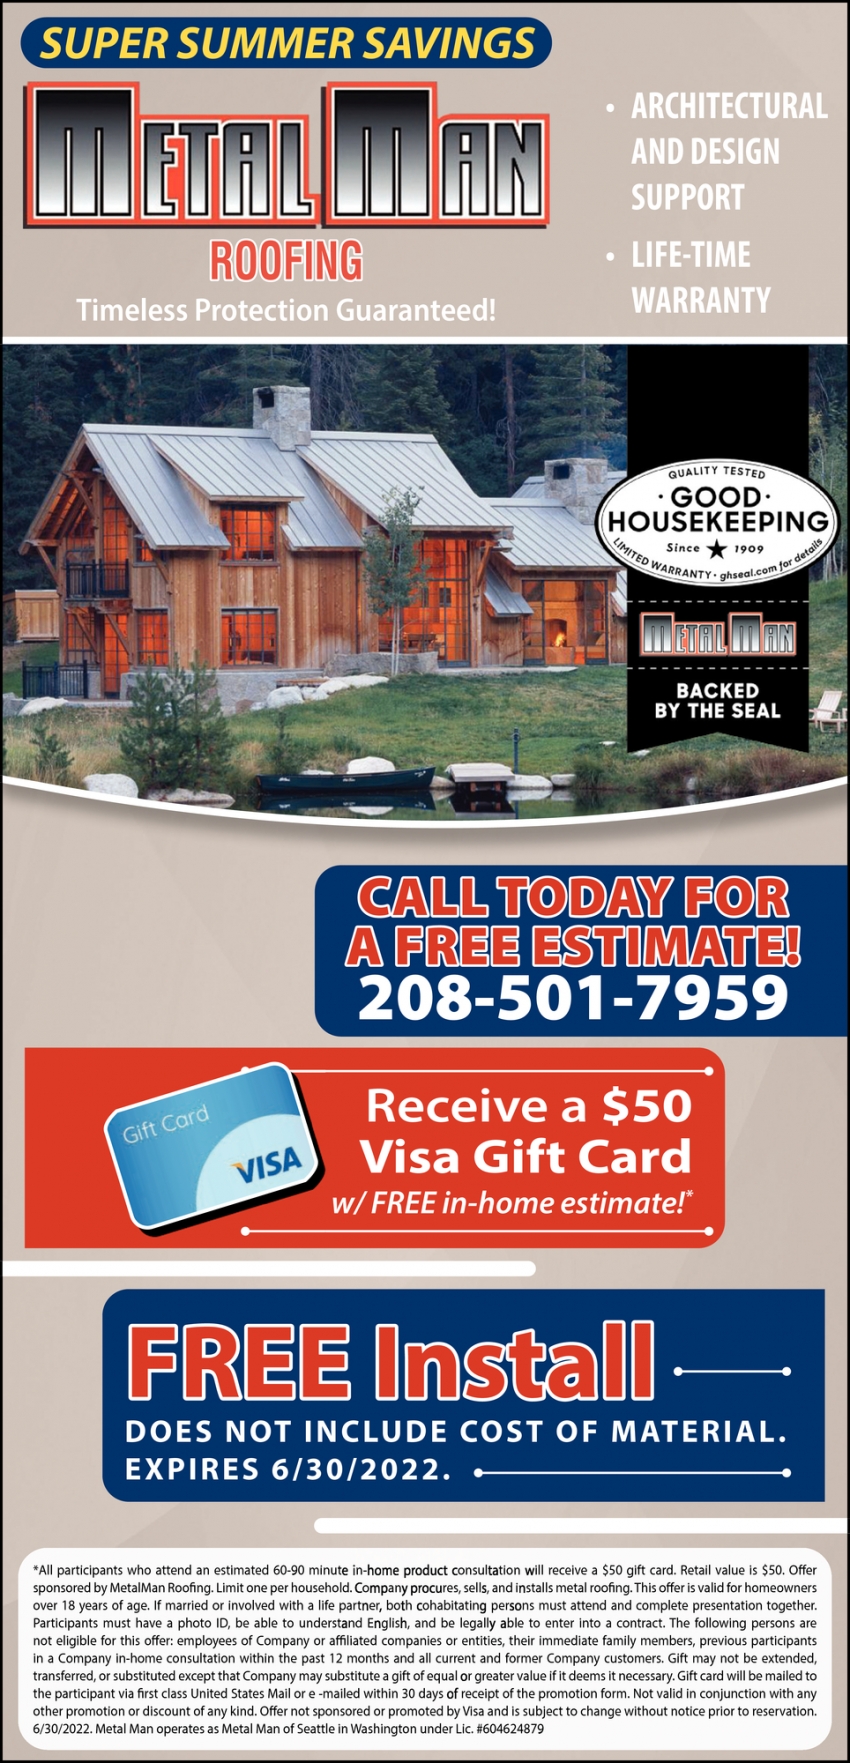 Call Today For Your Free Estimate!